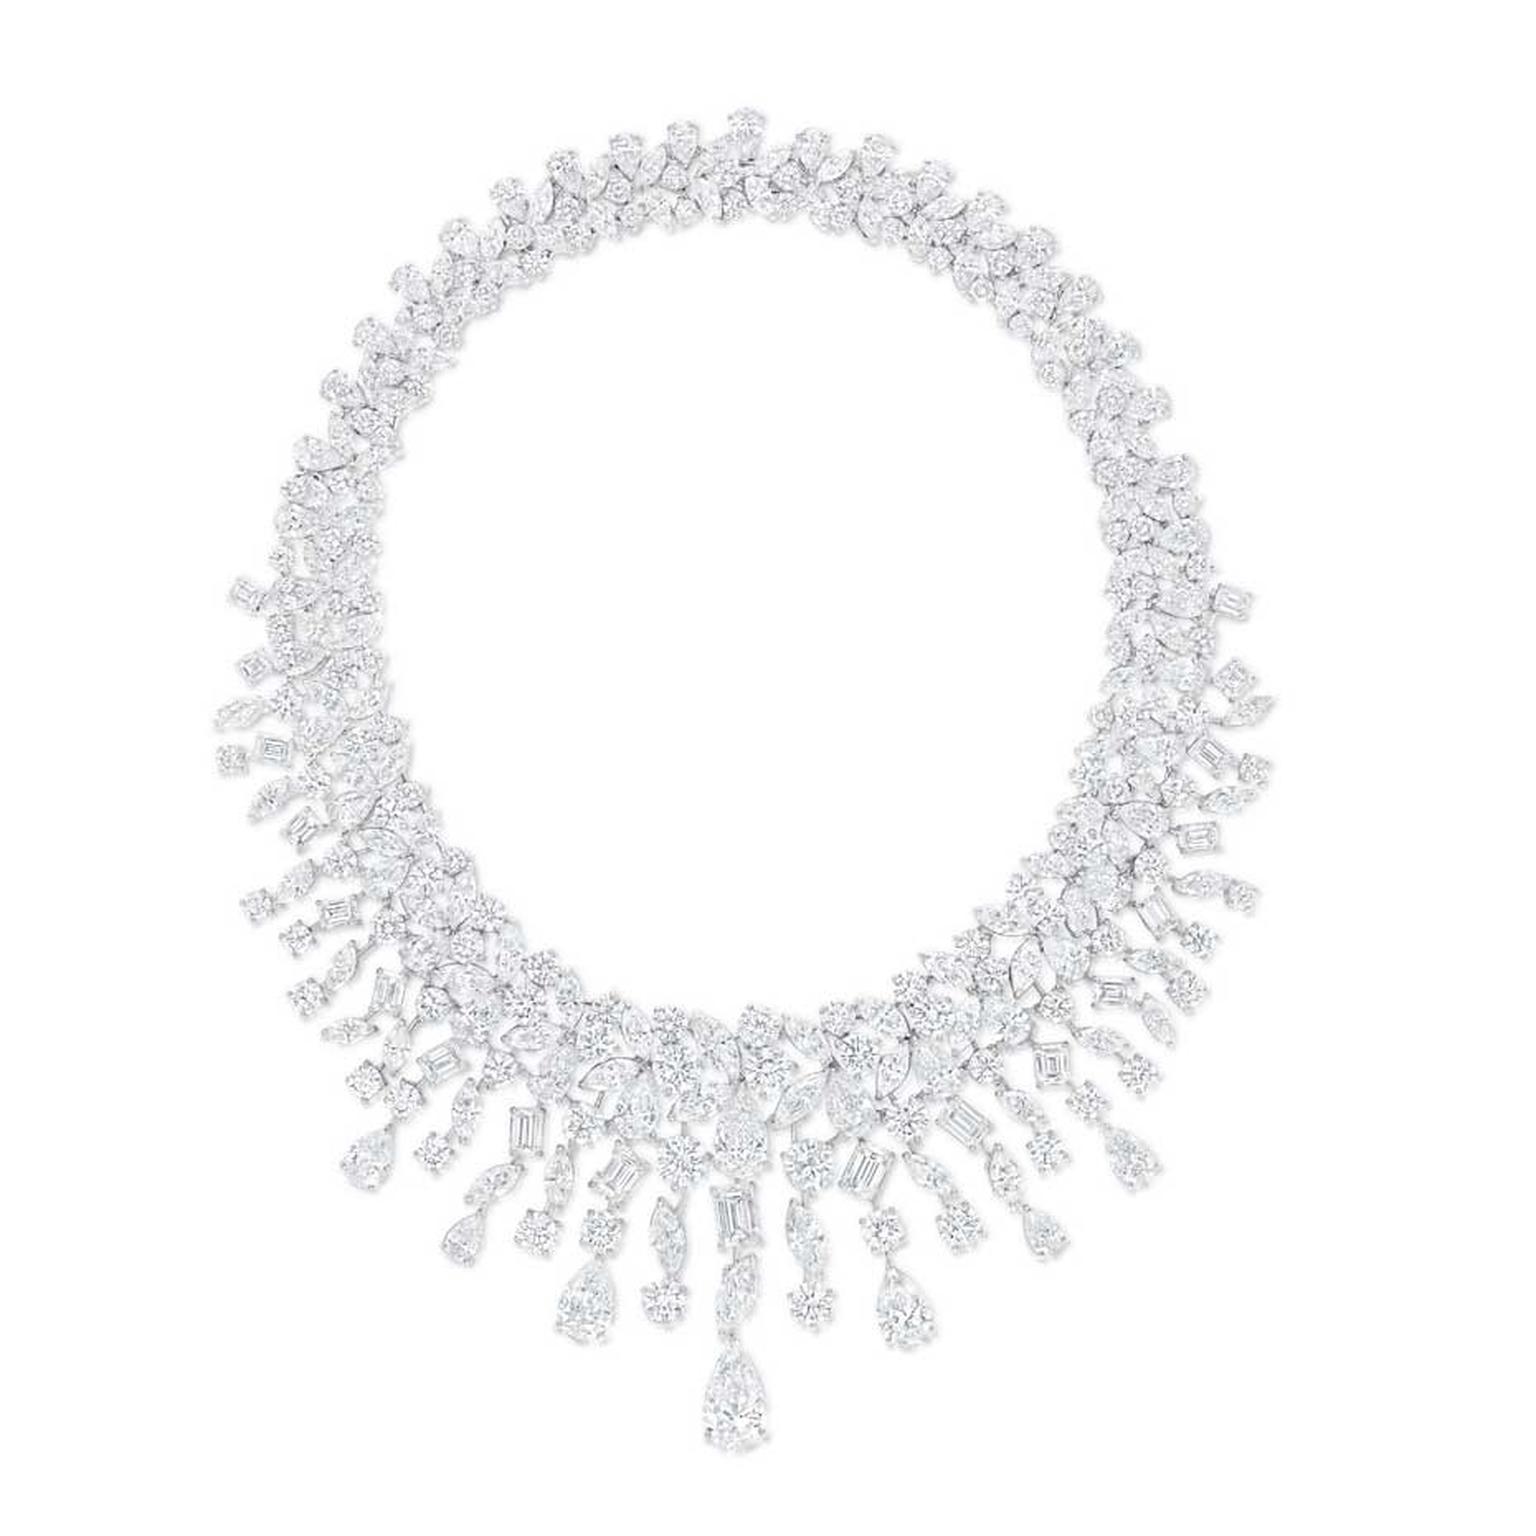 Graff Rhythm collection platinum necklace featuring brilliant, marquise, pear and baguette-shaped diamonds